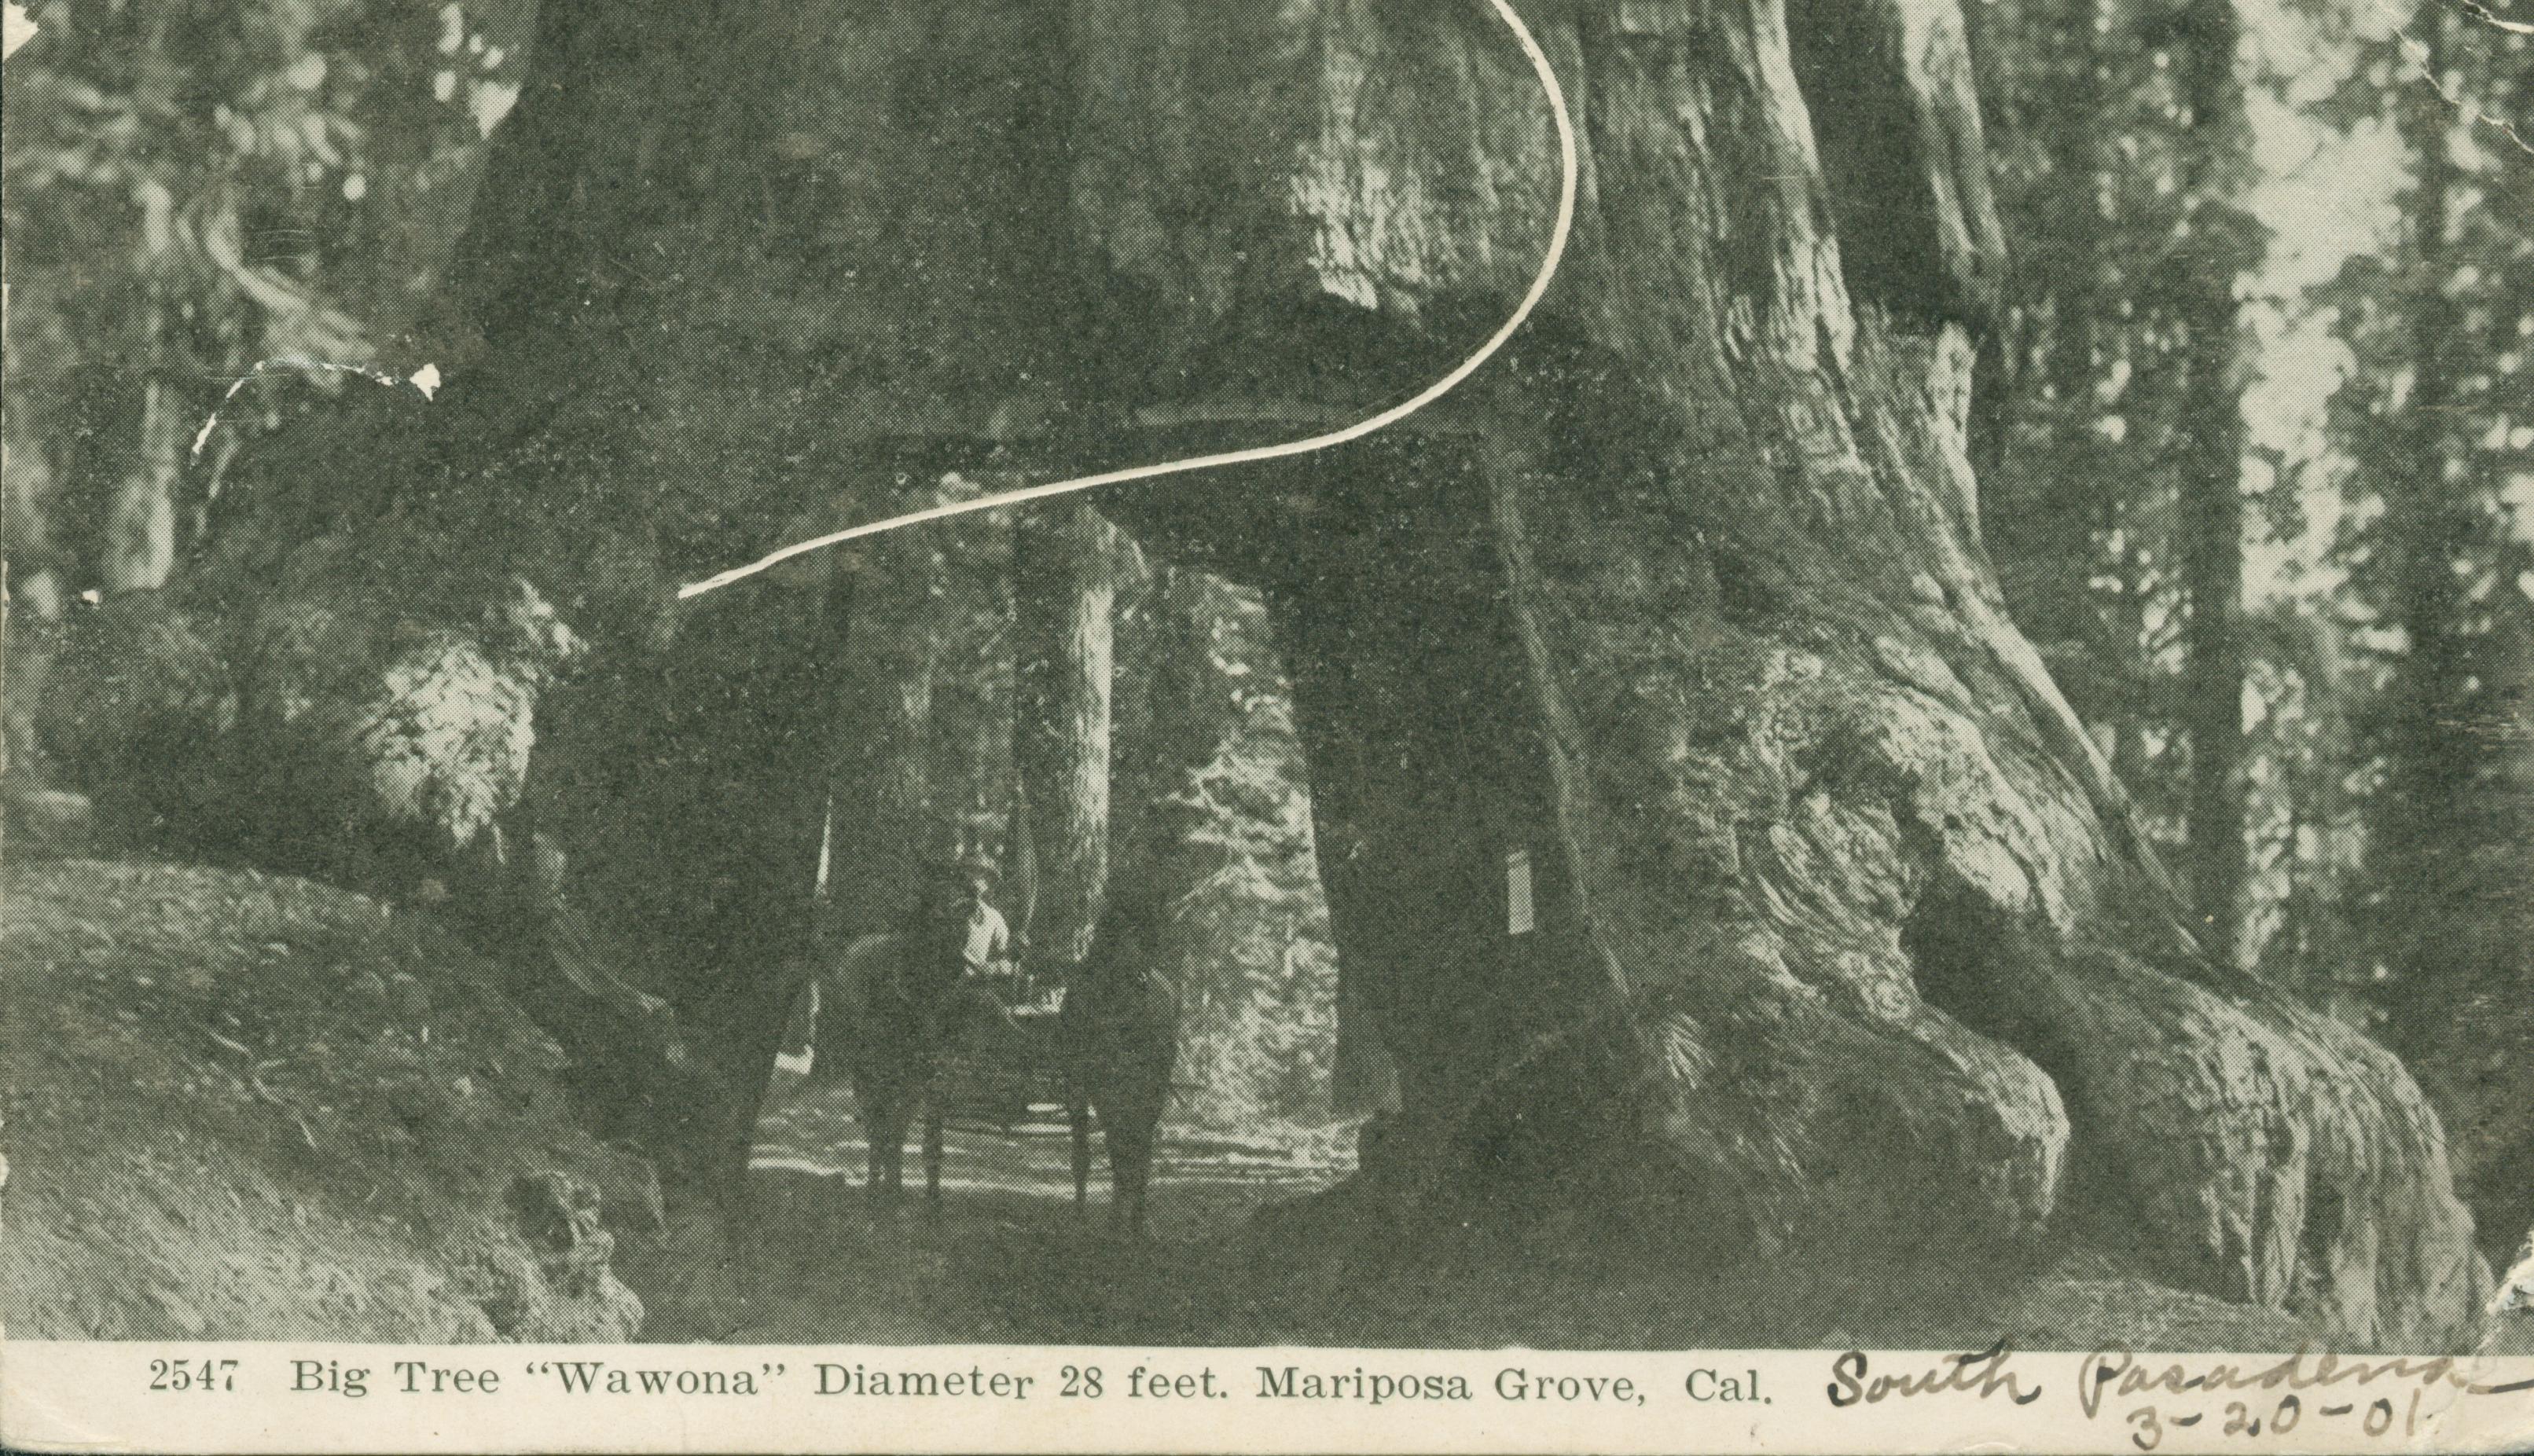 Shows a carriage with one person driving through the Wawona tree